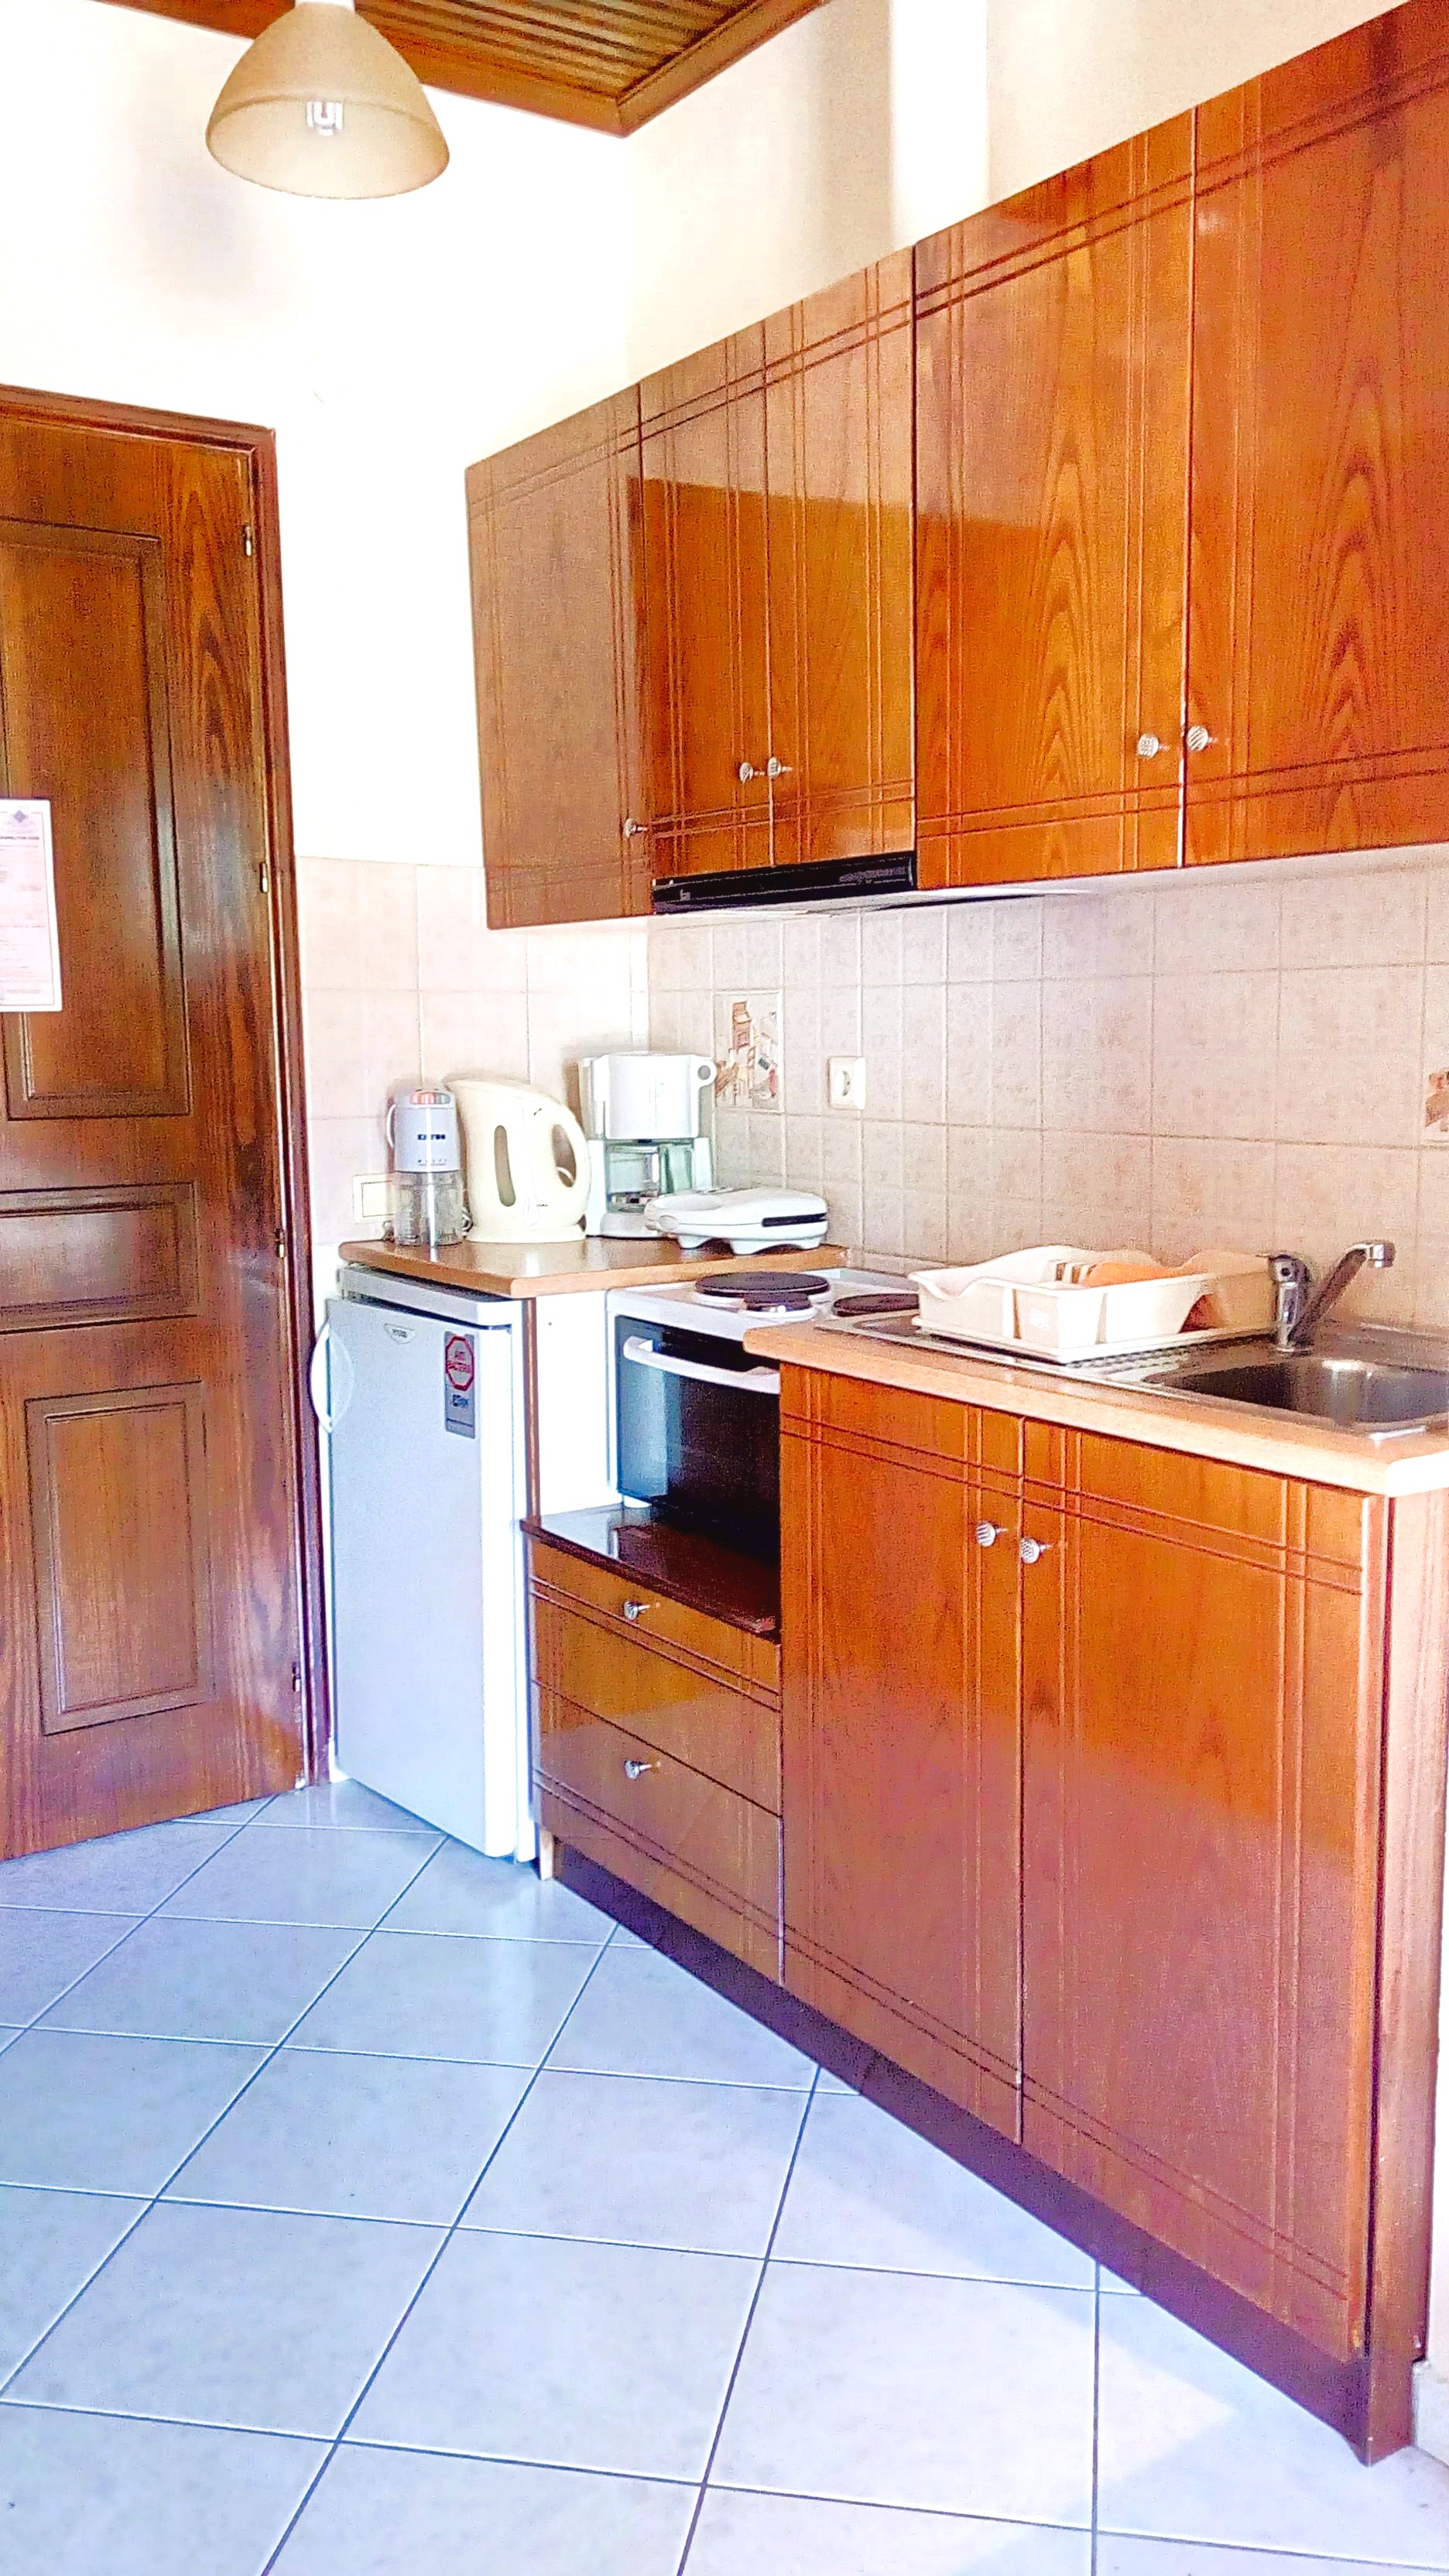 Elias studio with fully equipped kitchen